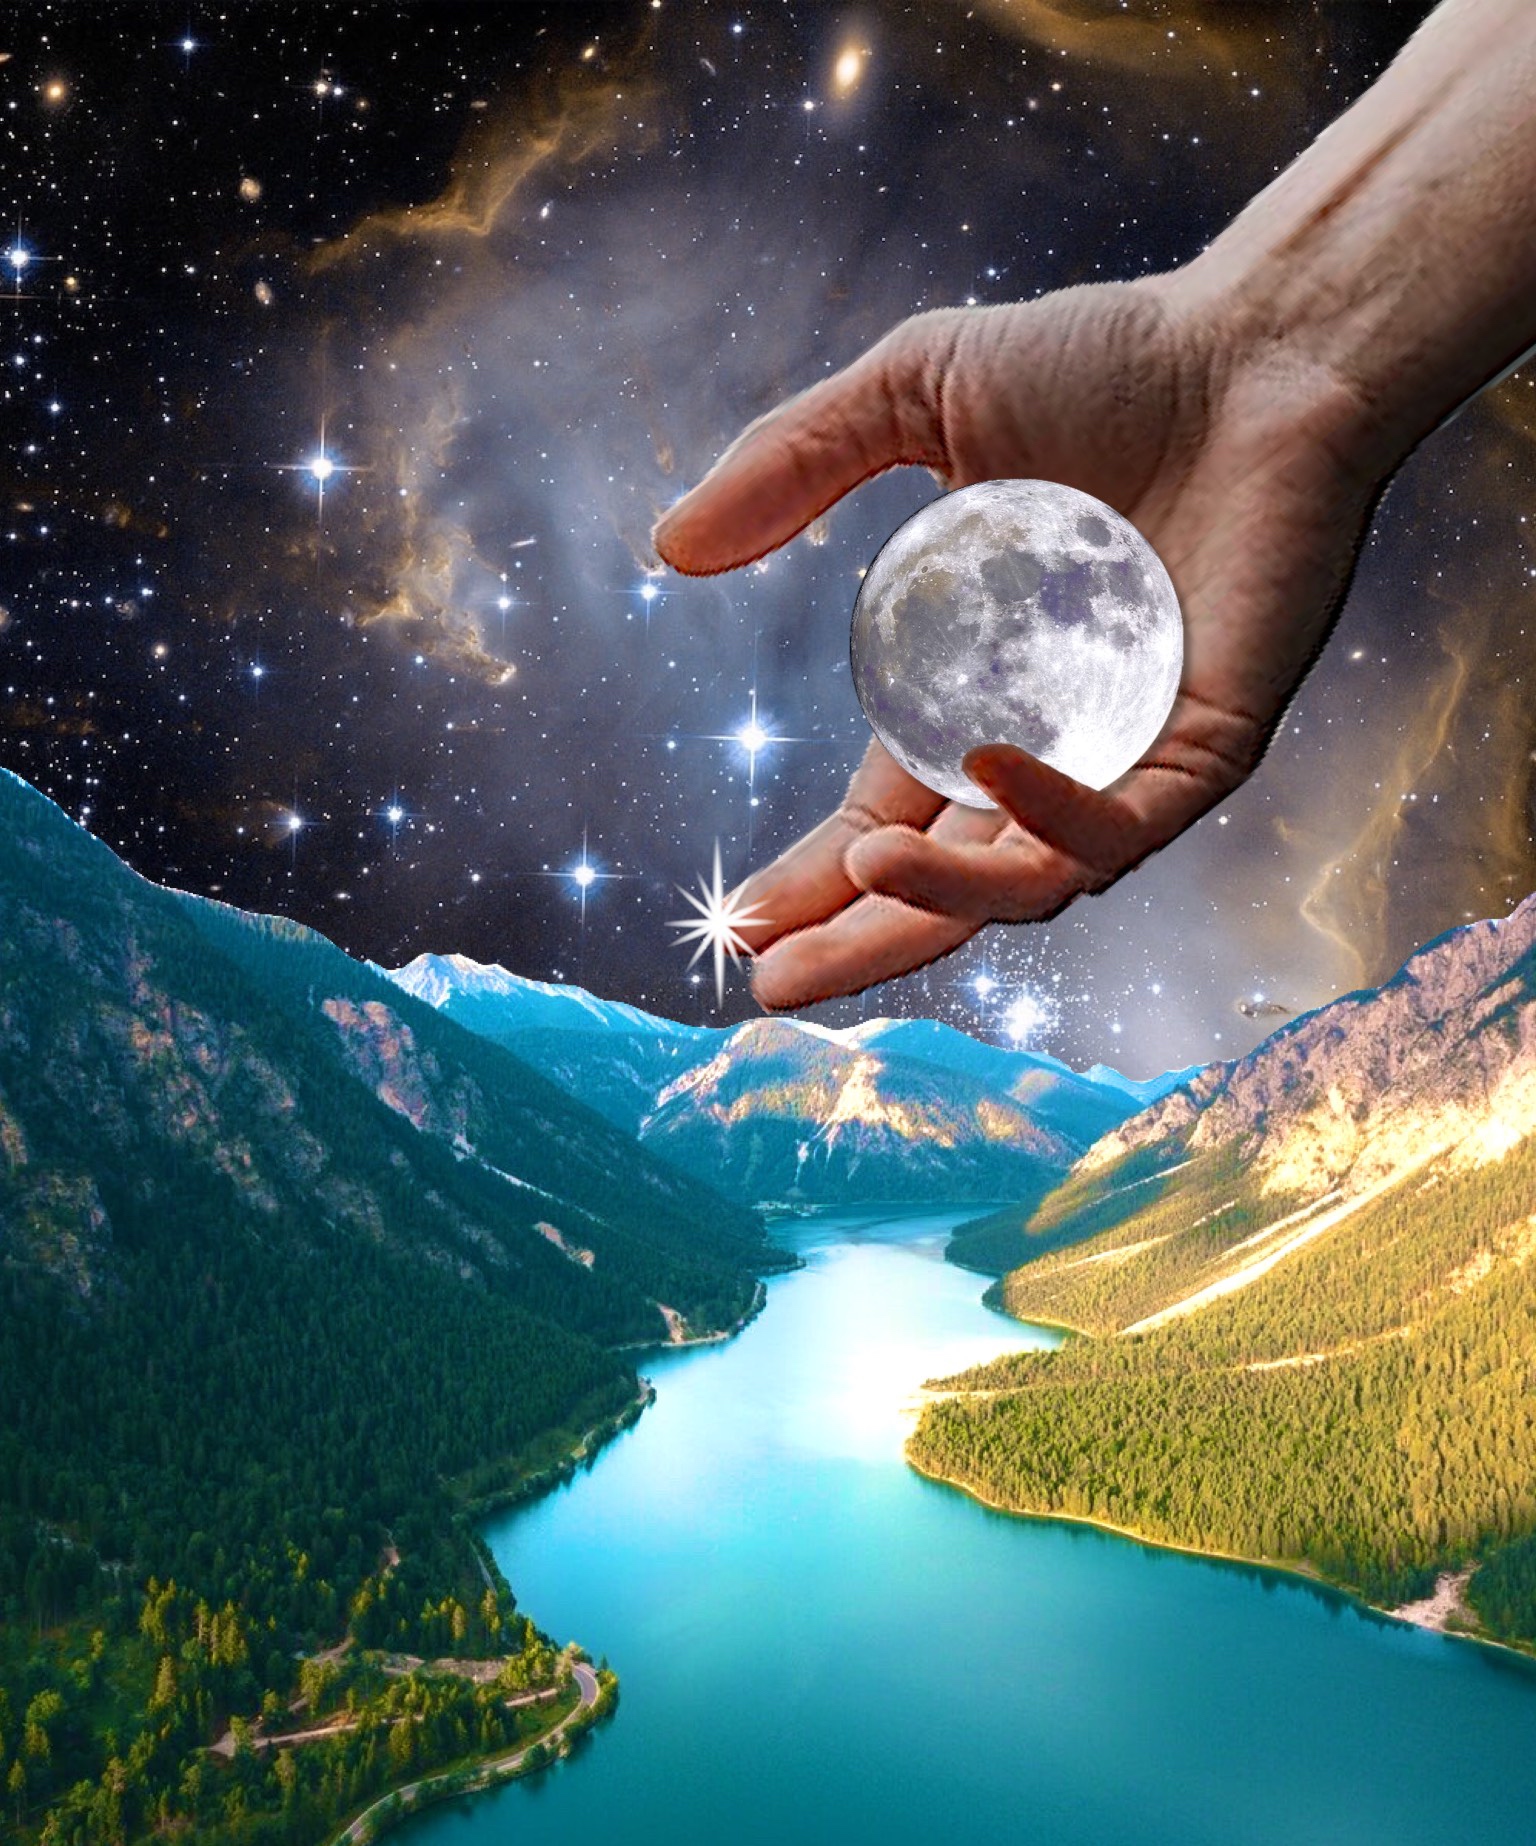 A Hand Holding A Crystal Ball Over A Lake Collage Art Template